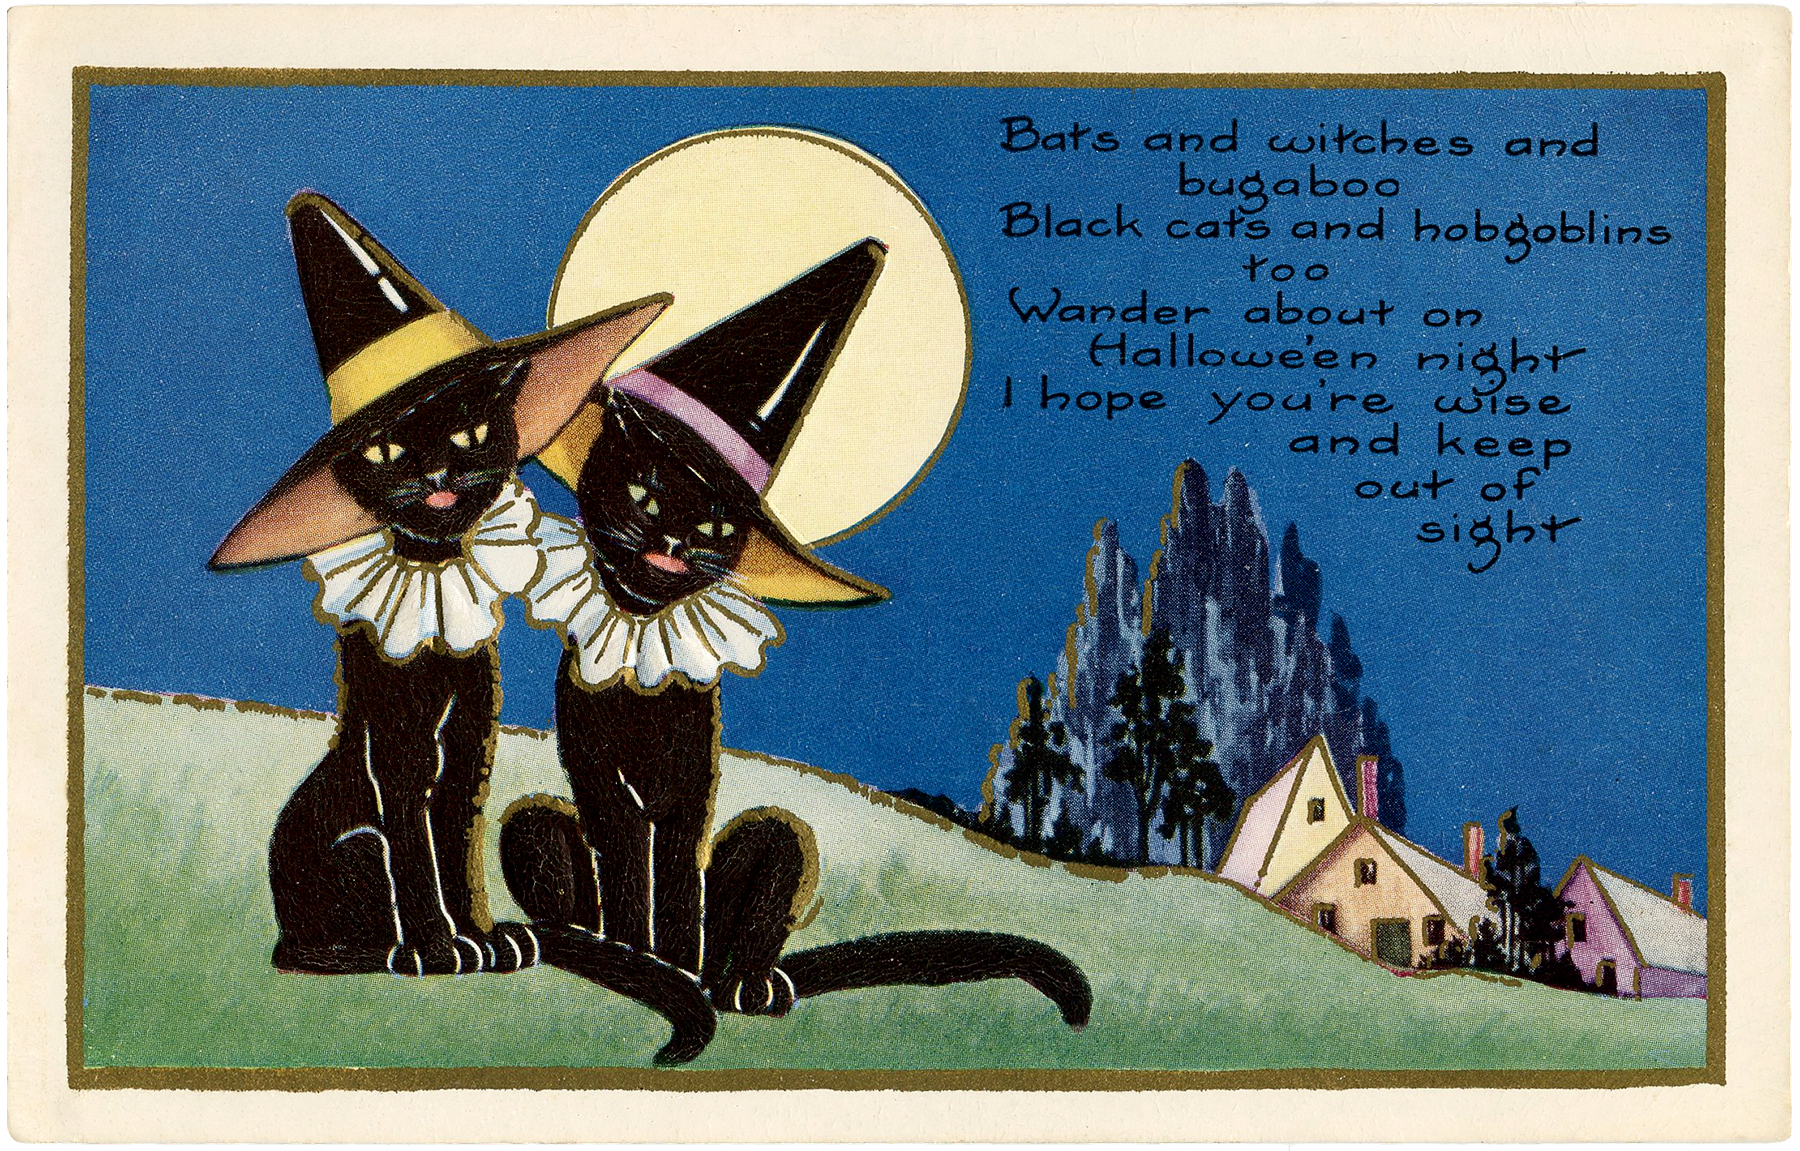 19 Halloween Cat Clipart (Black Cats)! - The Graphics Fairy